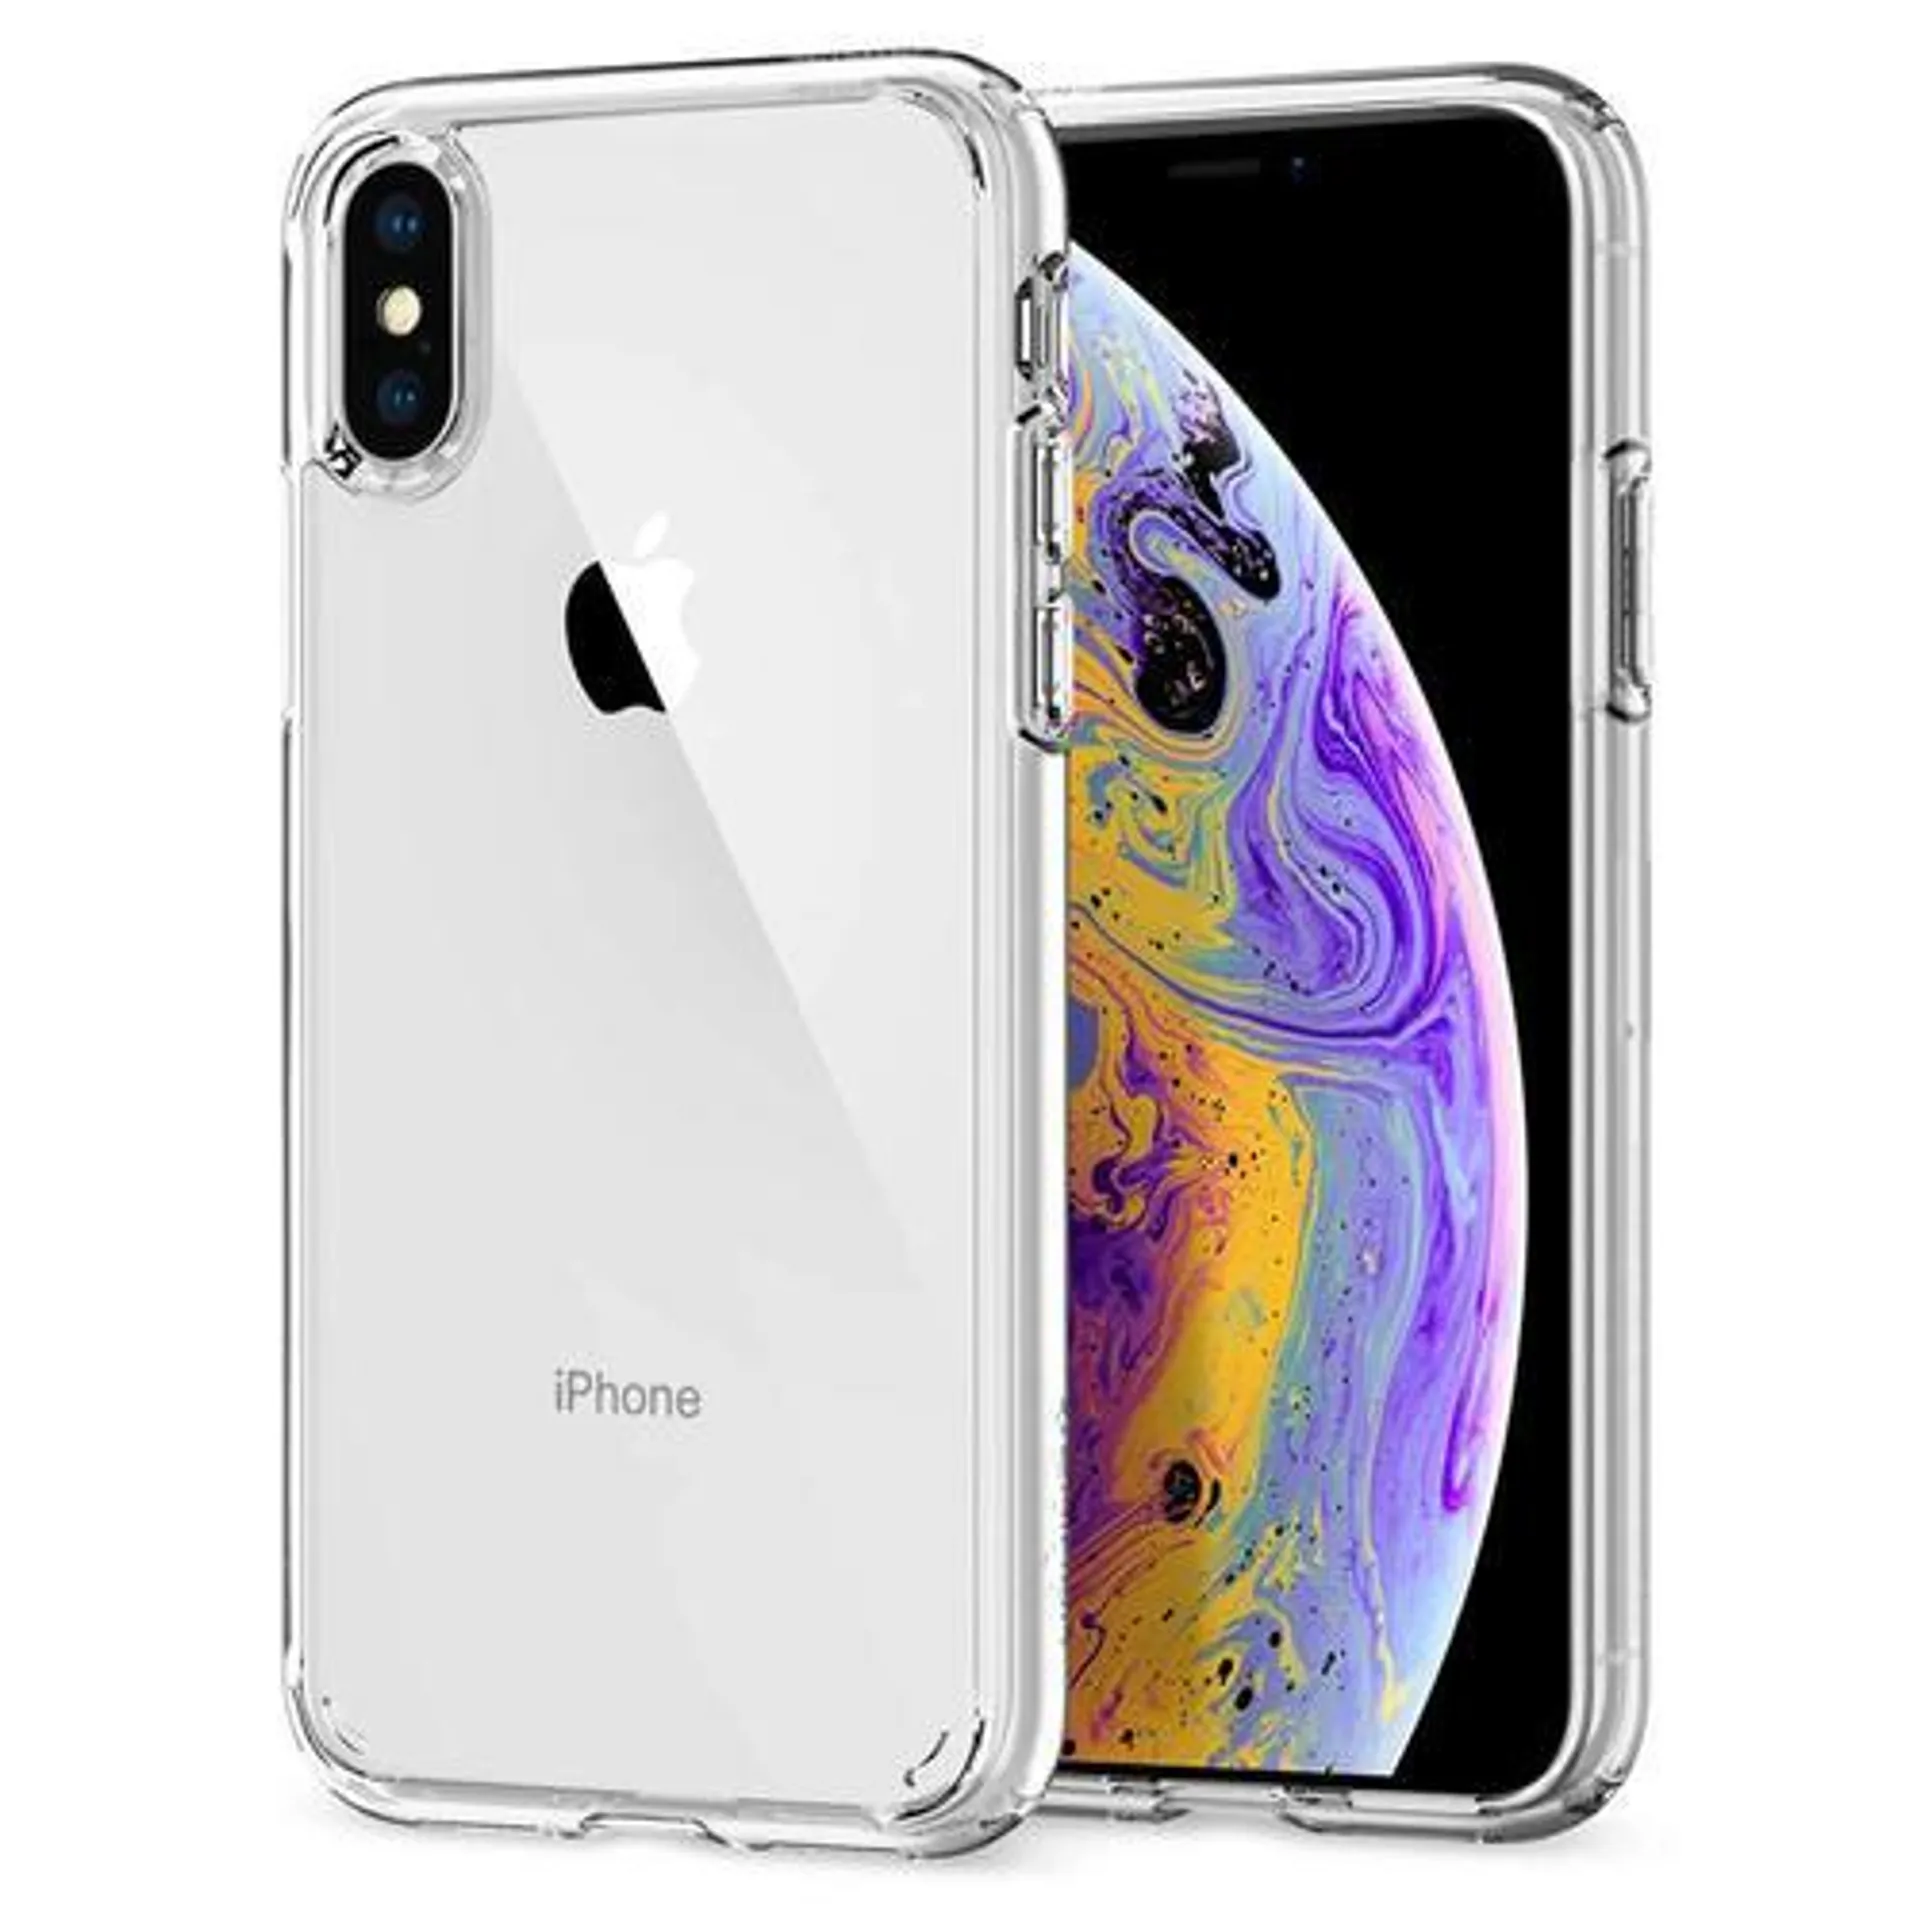 iPhone X Supper Thin Transparent Clear Soft Case with Glass Screen Protector - PrimeCables®